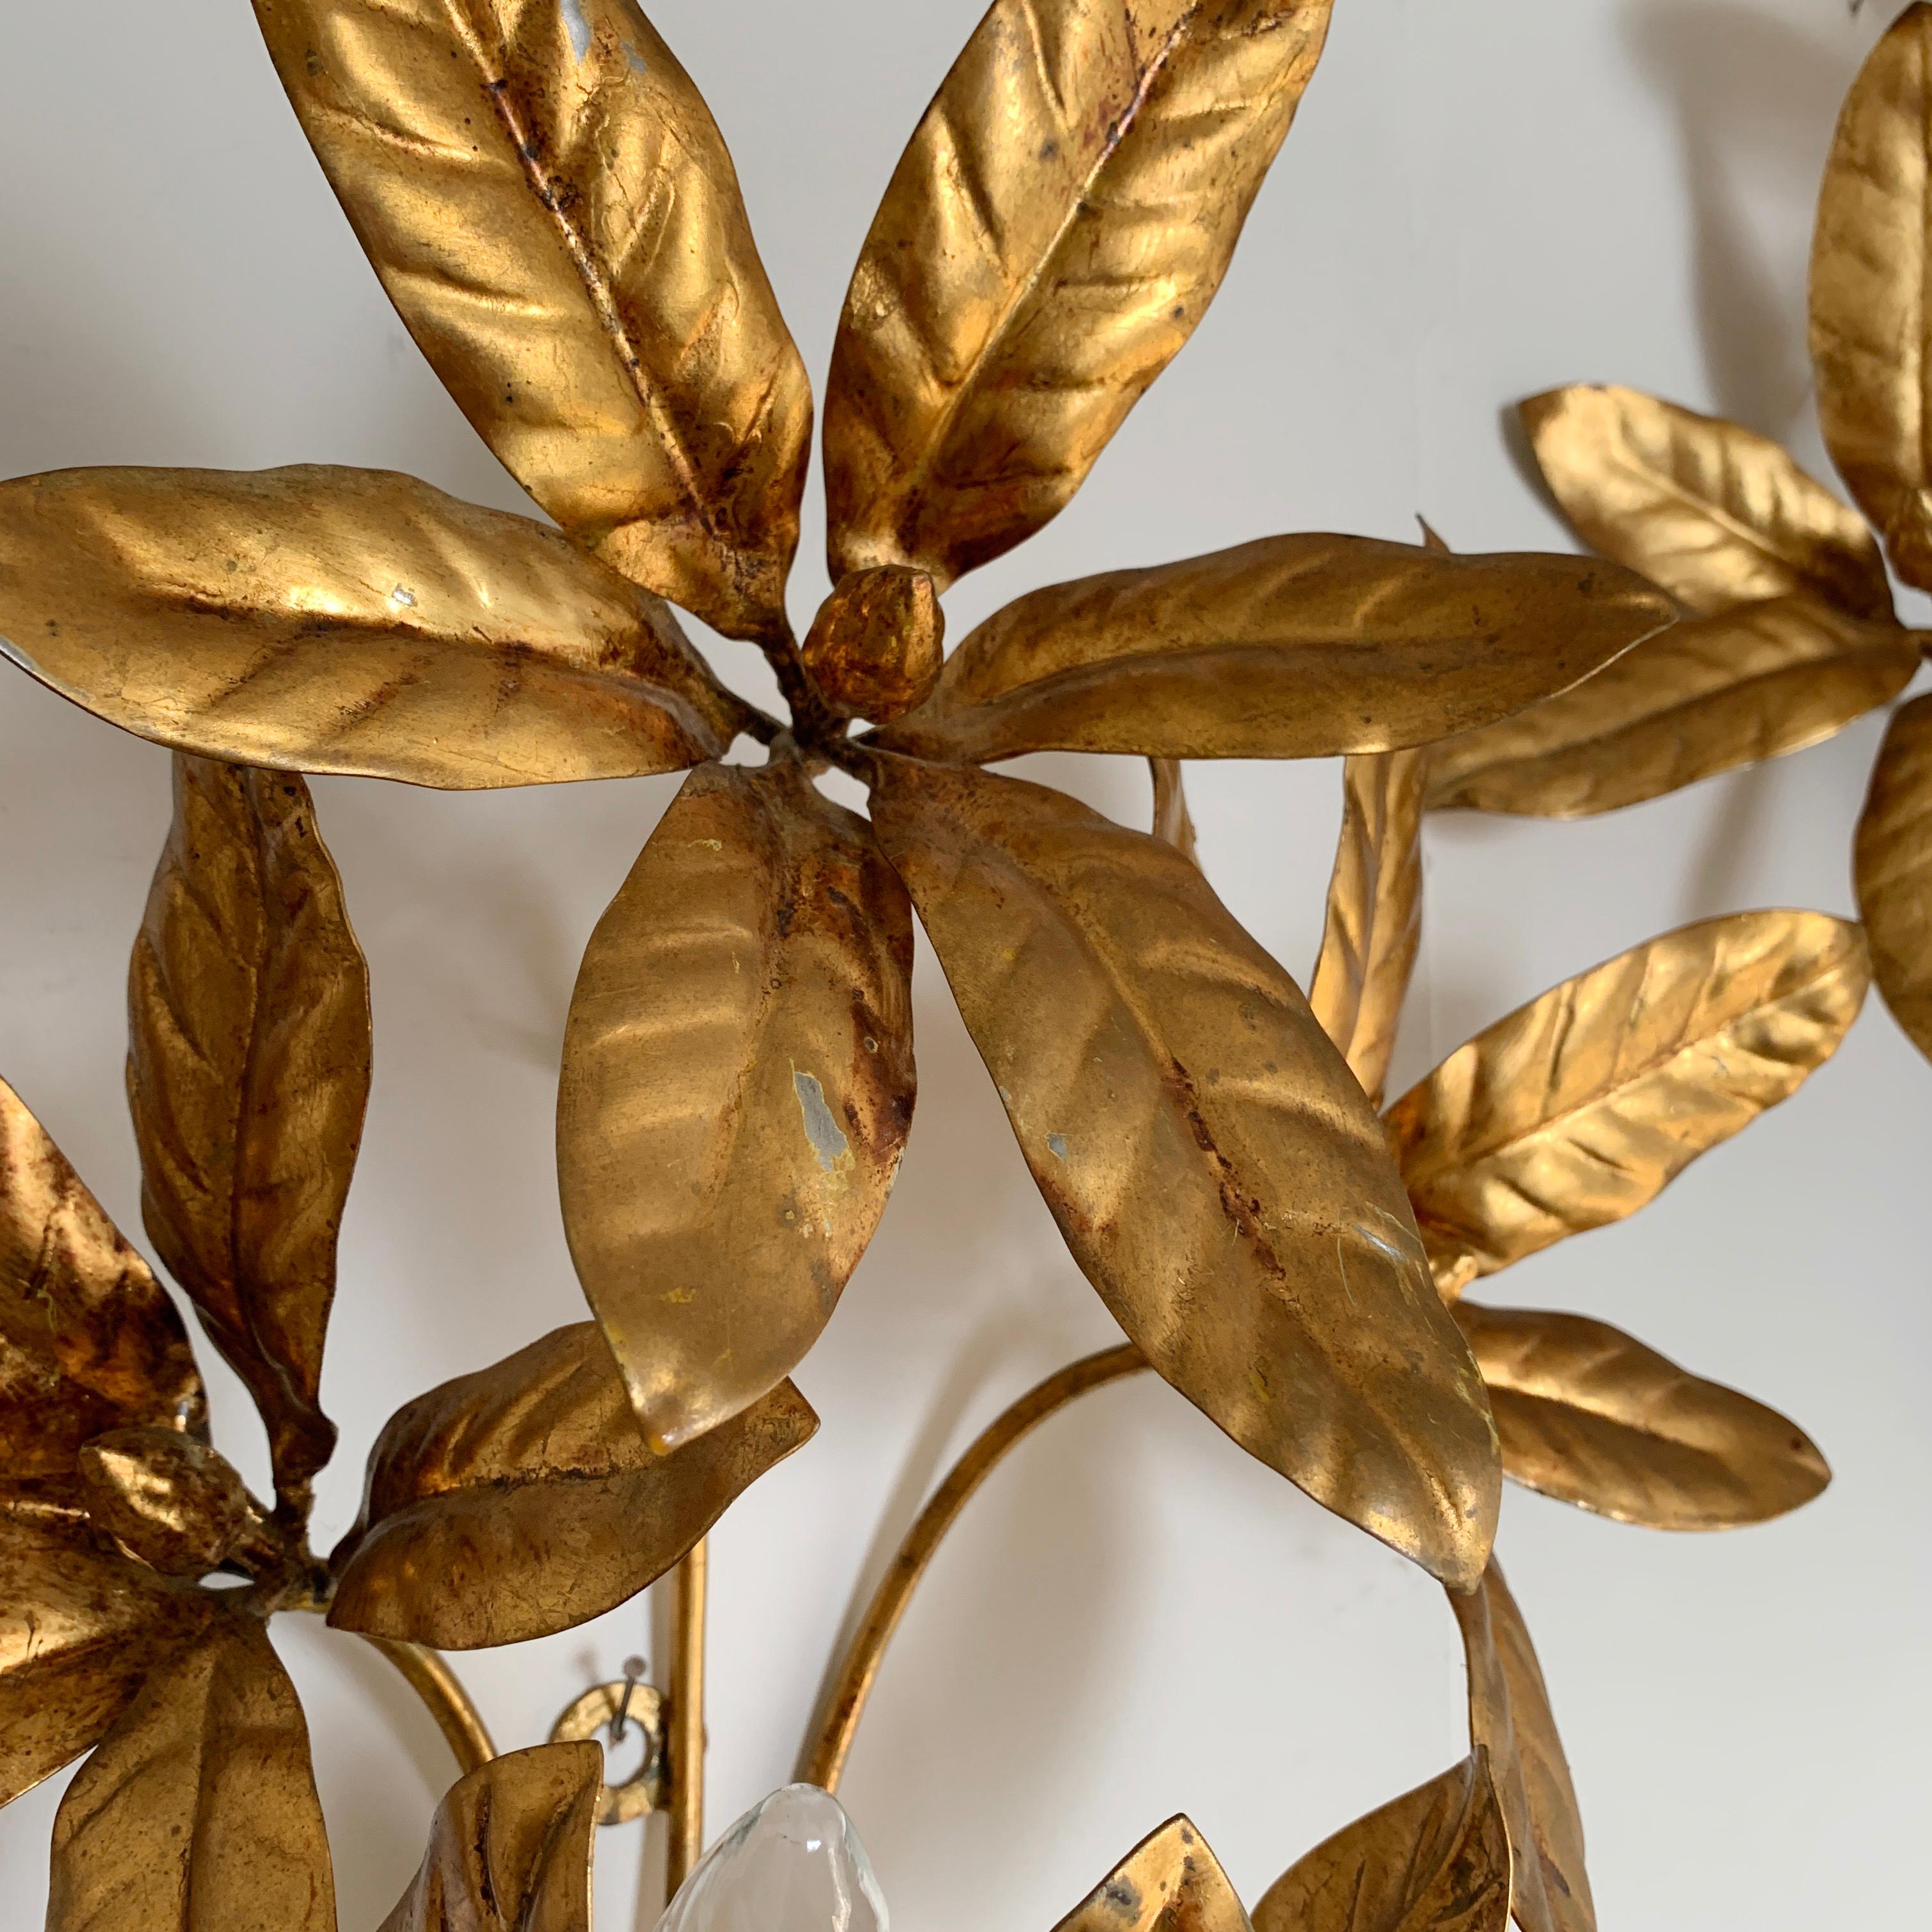 Fabulous gilt flower wall lights by 'Maison Flor Art', France, 1970s
3 large gilt flowers with single bulb holder hidden behind the 3 leaves at the bottom
The lights are in good vintage condition, some losses to gilt in places
Measures: 50cm